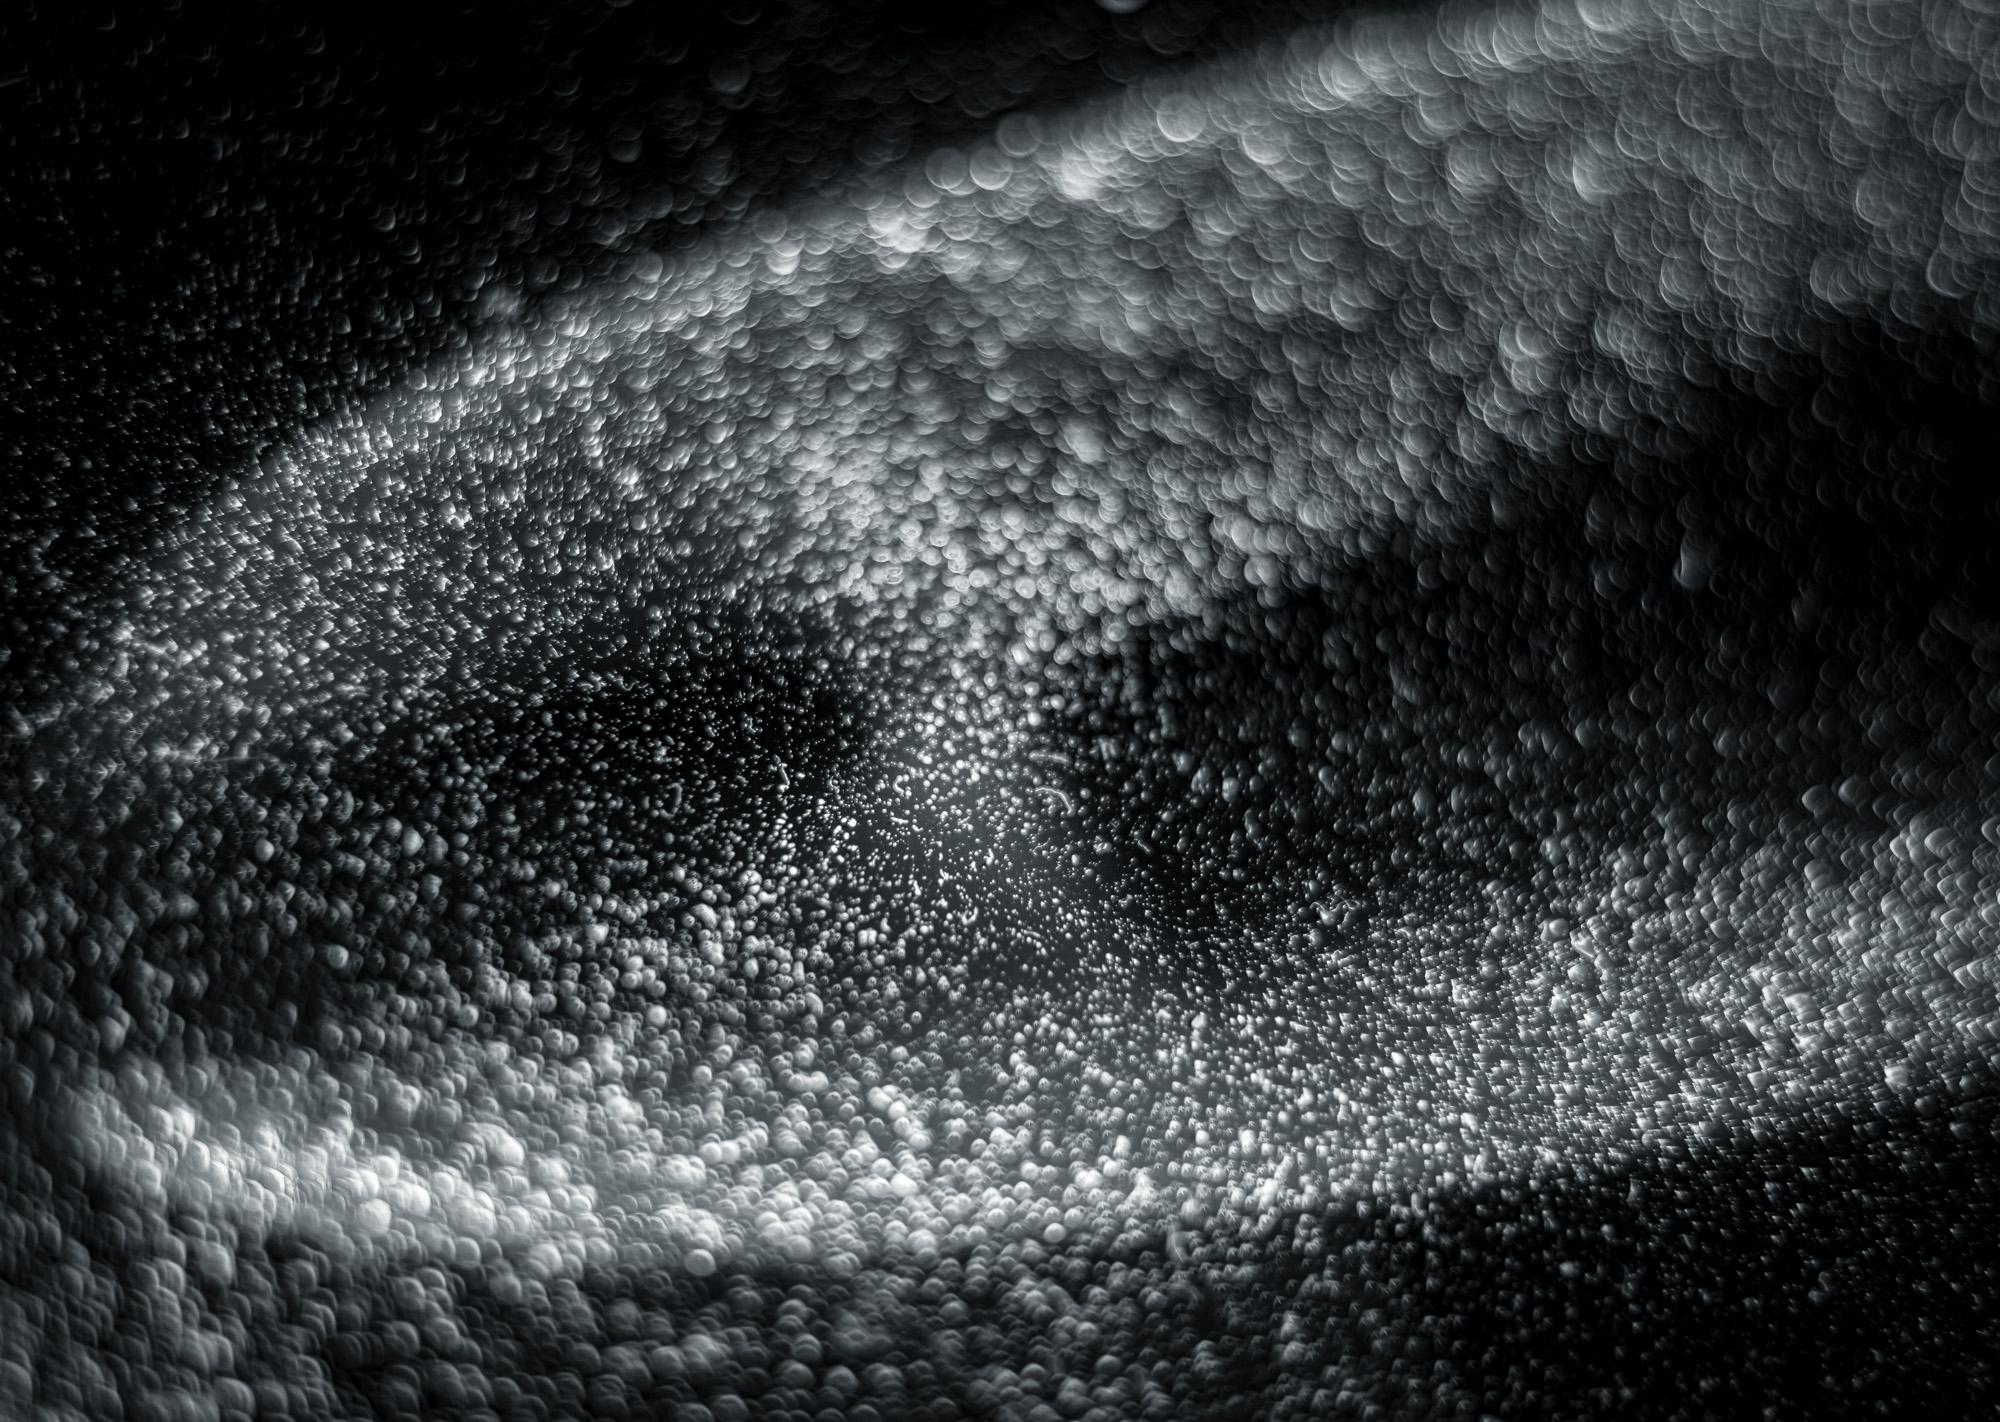 Limited Edition Black and White Photograph - Nature of Particles #23 20x24

The Nature of Particles series consists of abstract photographs of ordinary particulates, that we observe in our everyday surroundings as floating fragments seen in shafts